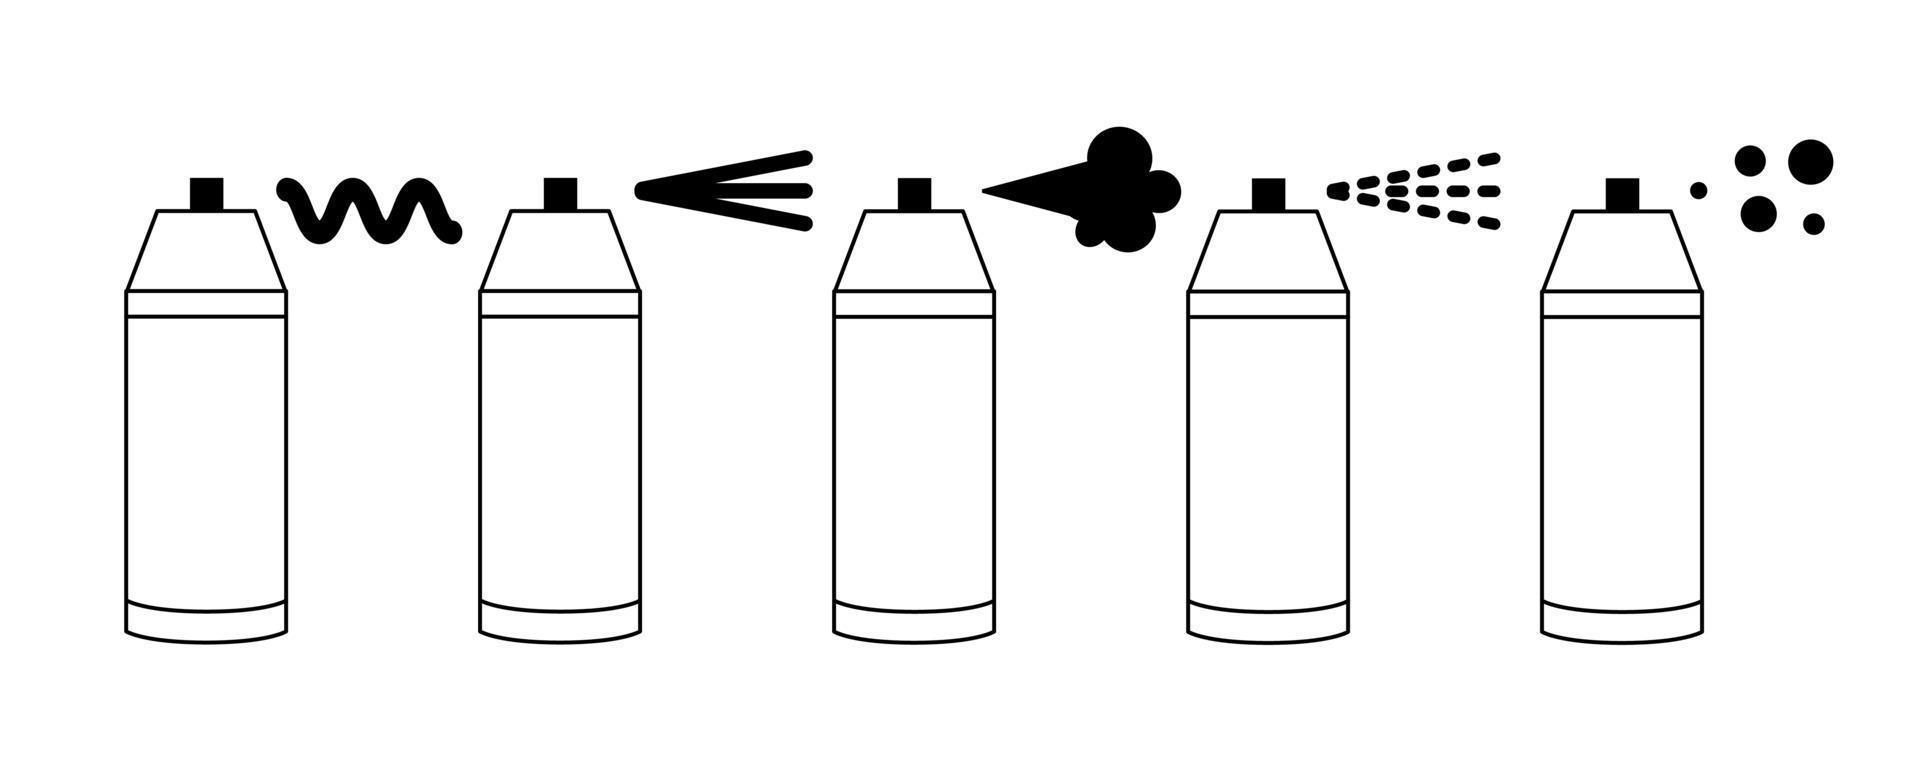 Spray paint icons set. Linear drawing of aerosol. Vector illustration. Samples of paint. Outline icon of spray can.